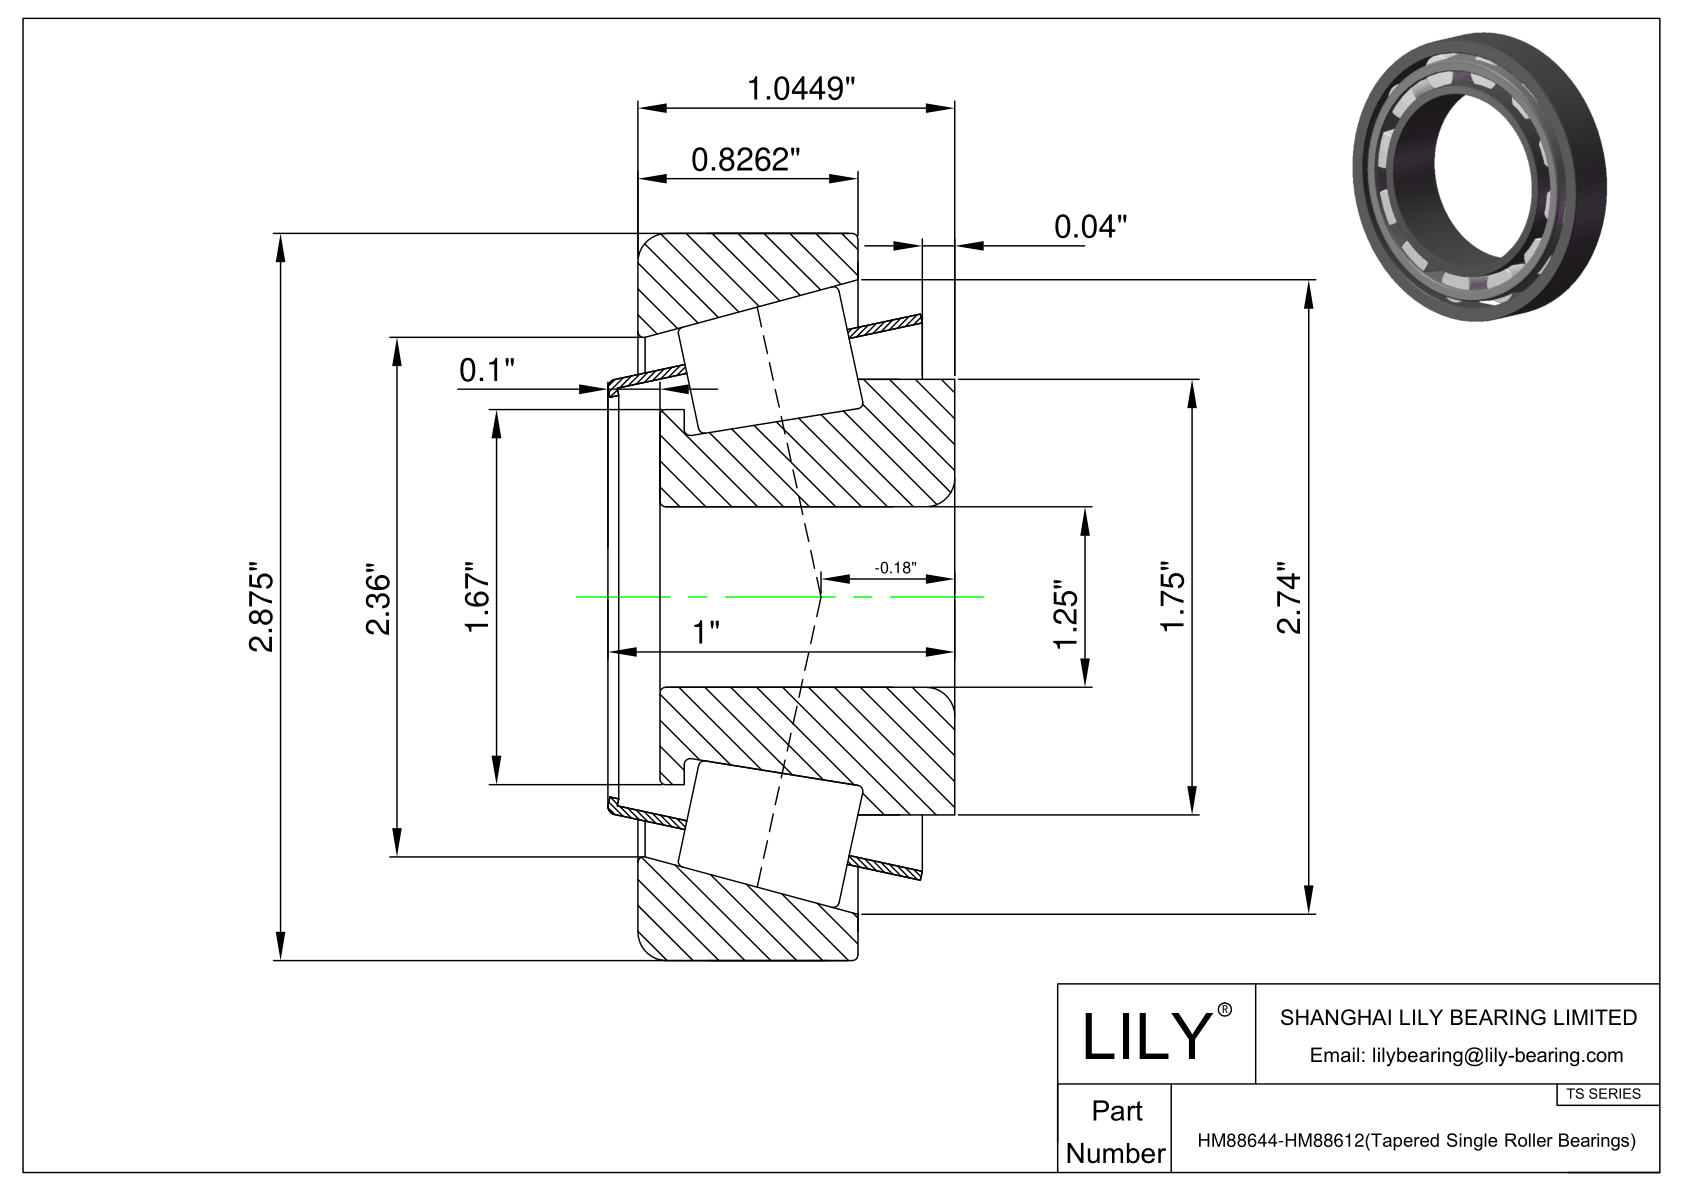 HM88644-HM88612 TS (Tapered Single Roller Bearings) (Imperial) cad drawing